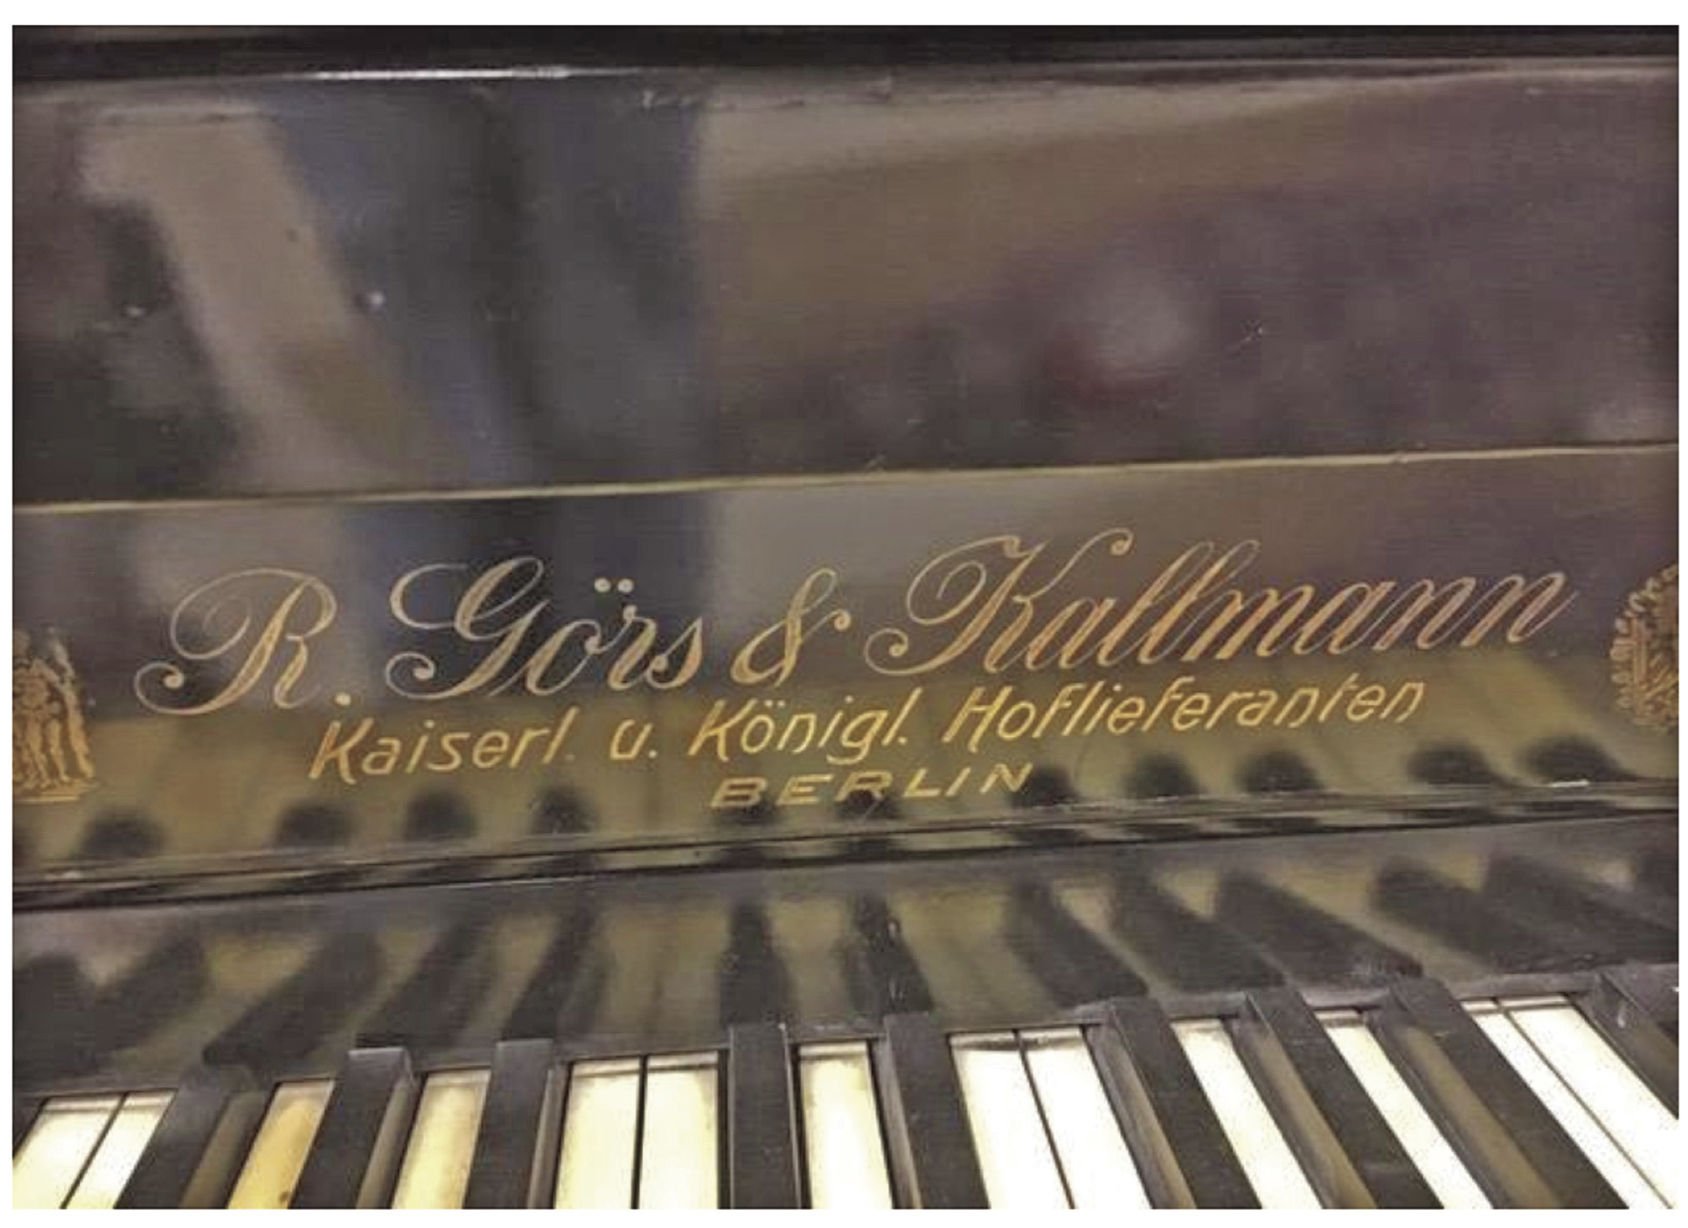 r gors and kallmann piano serial numbers